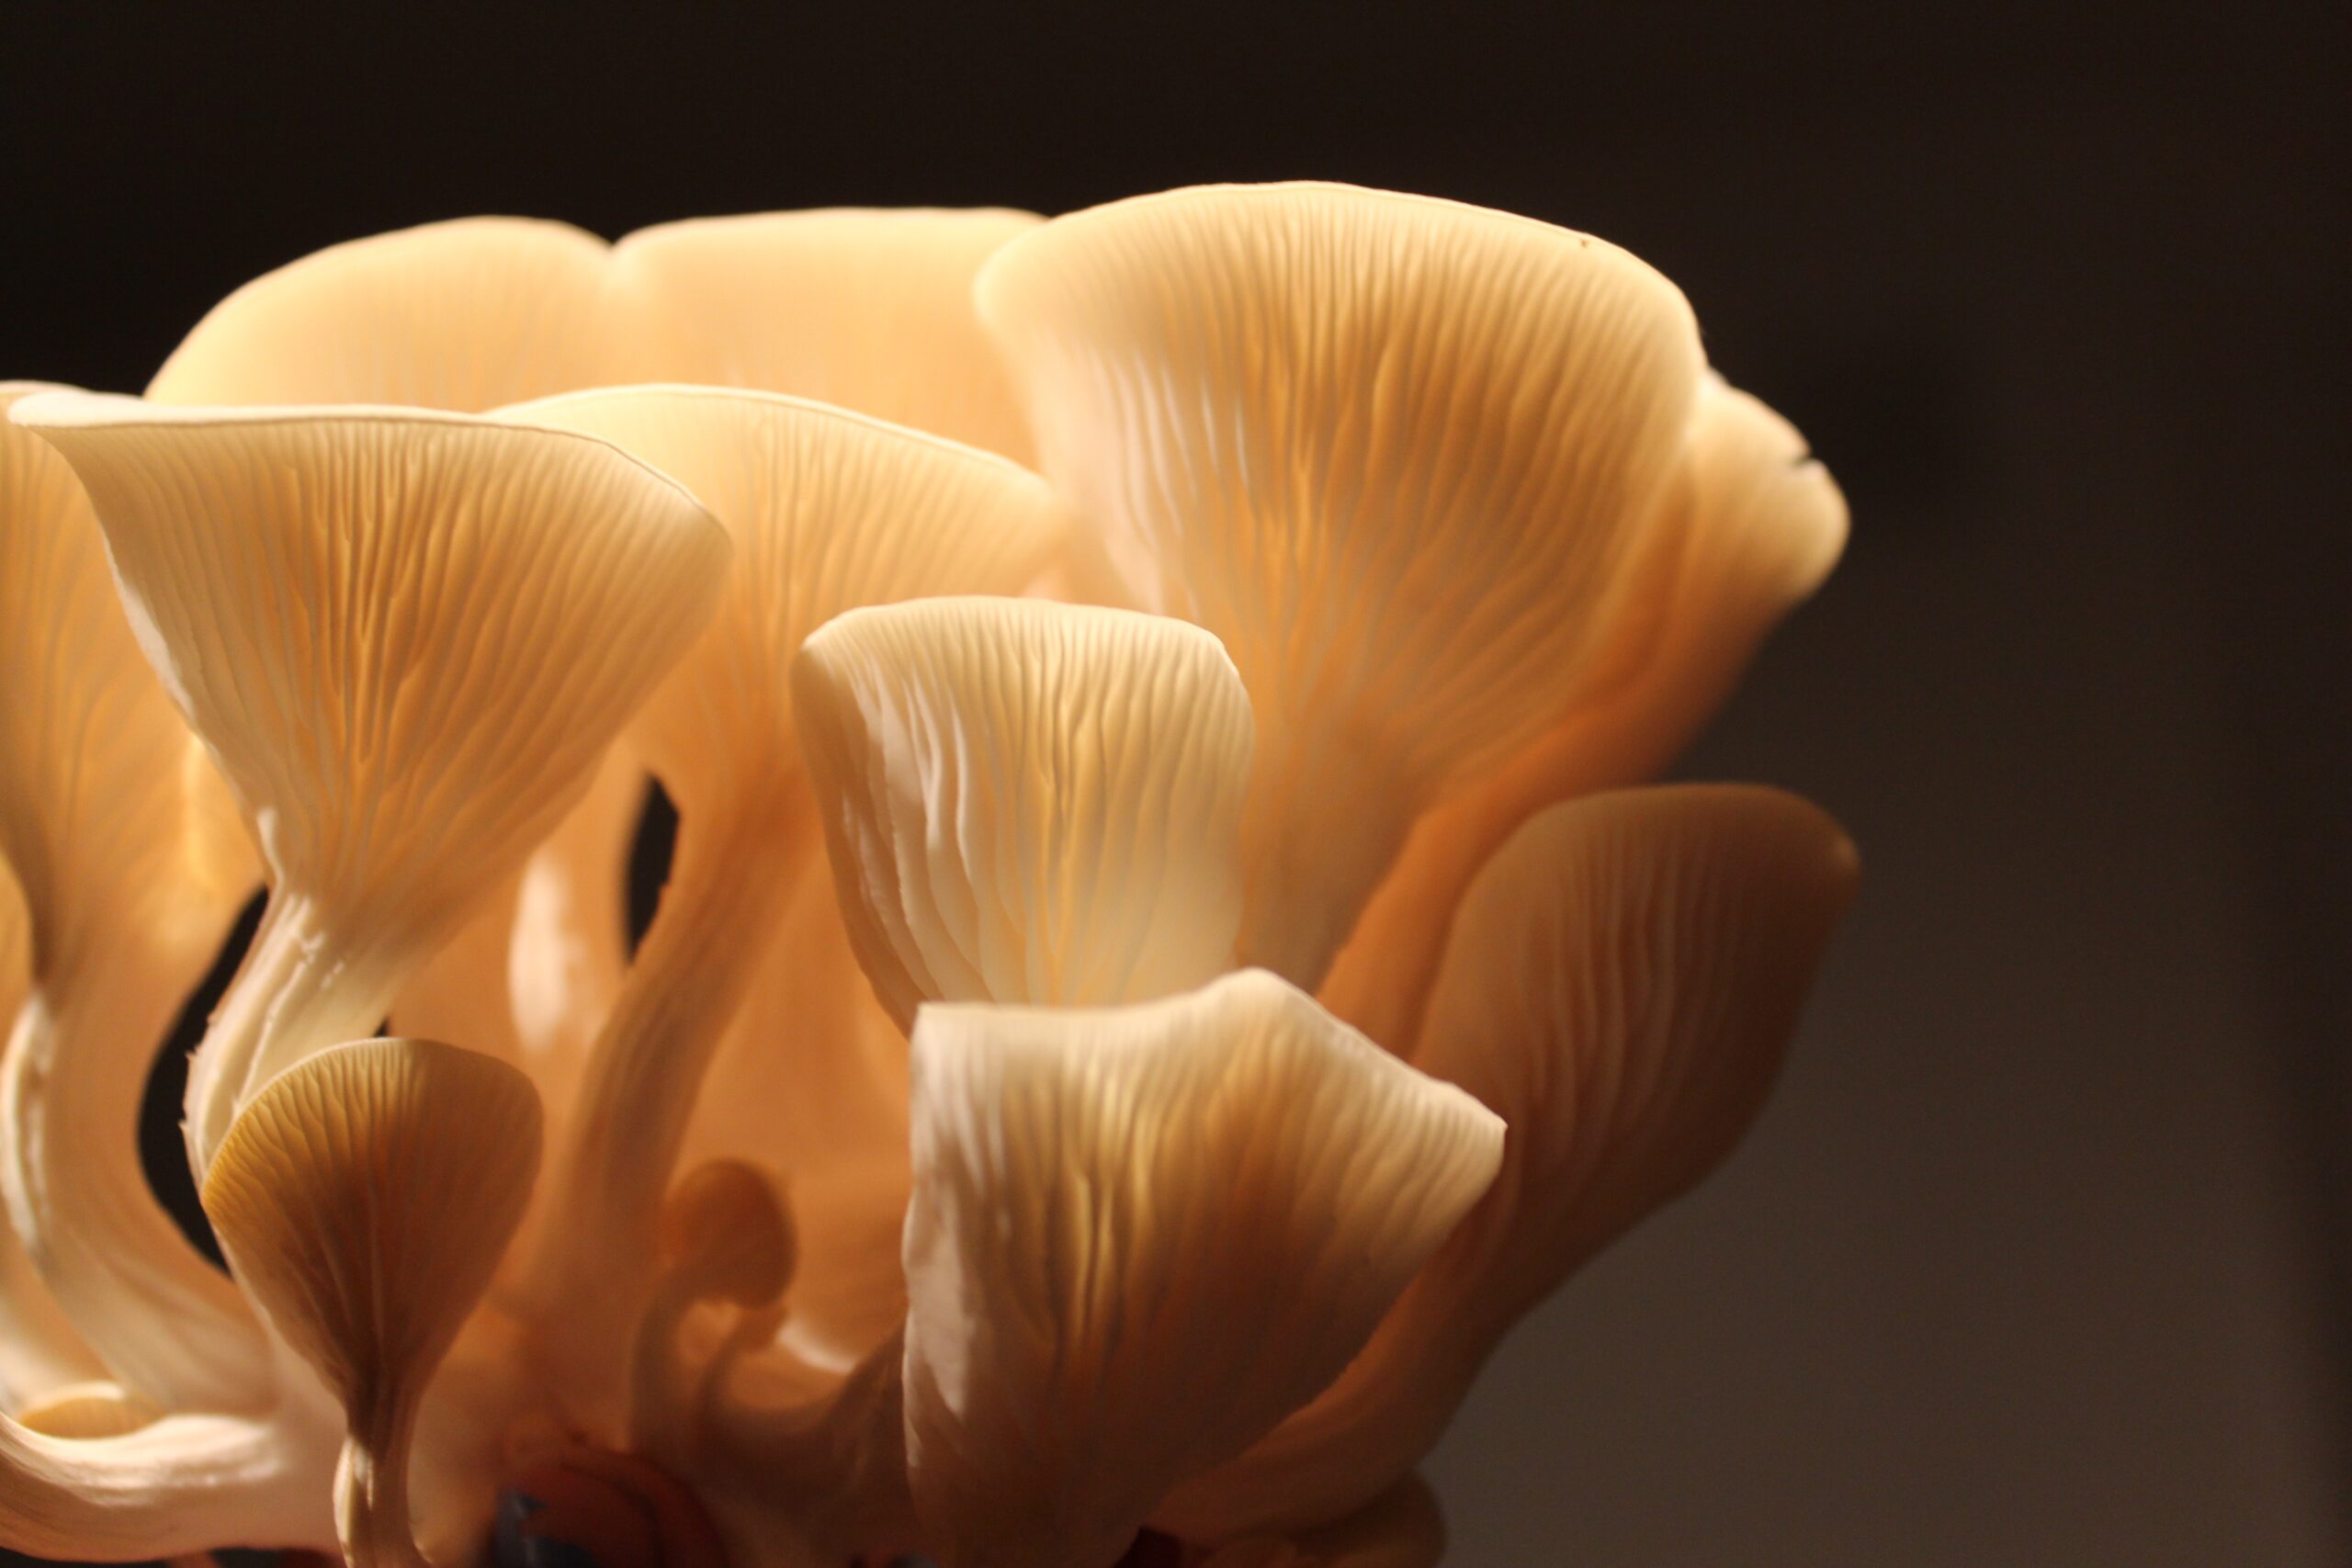 Researchers in Australia are training oyster mushrooms to consume cigarette butts.